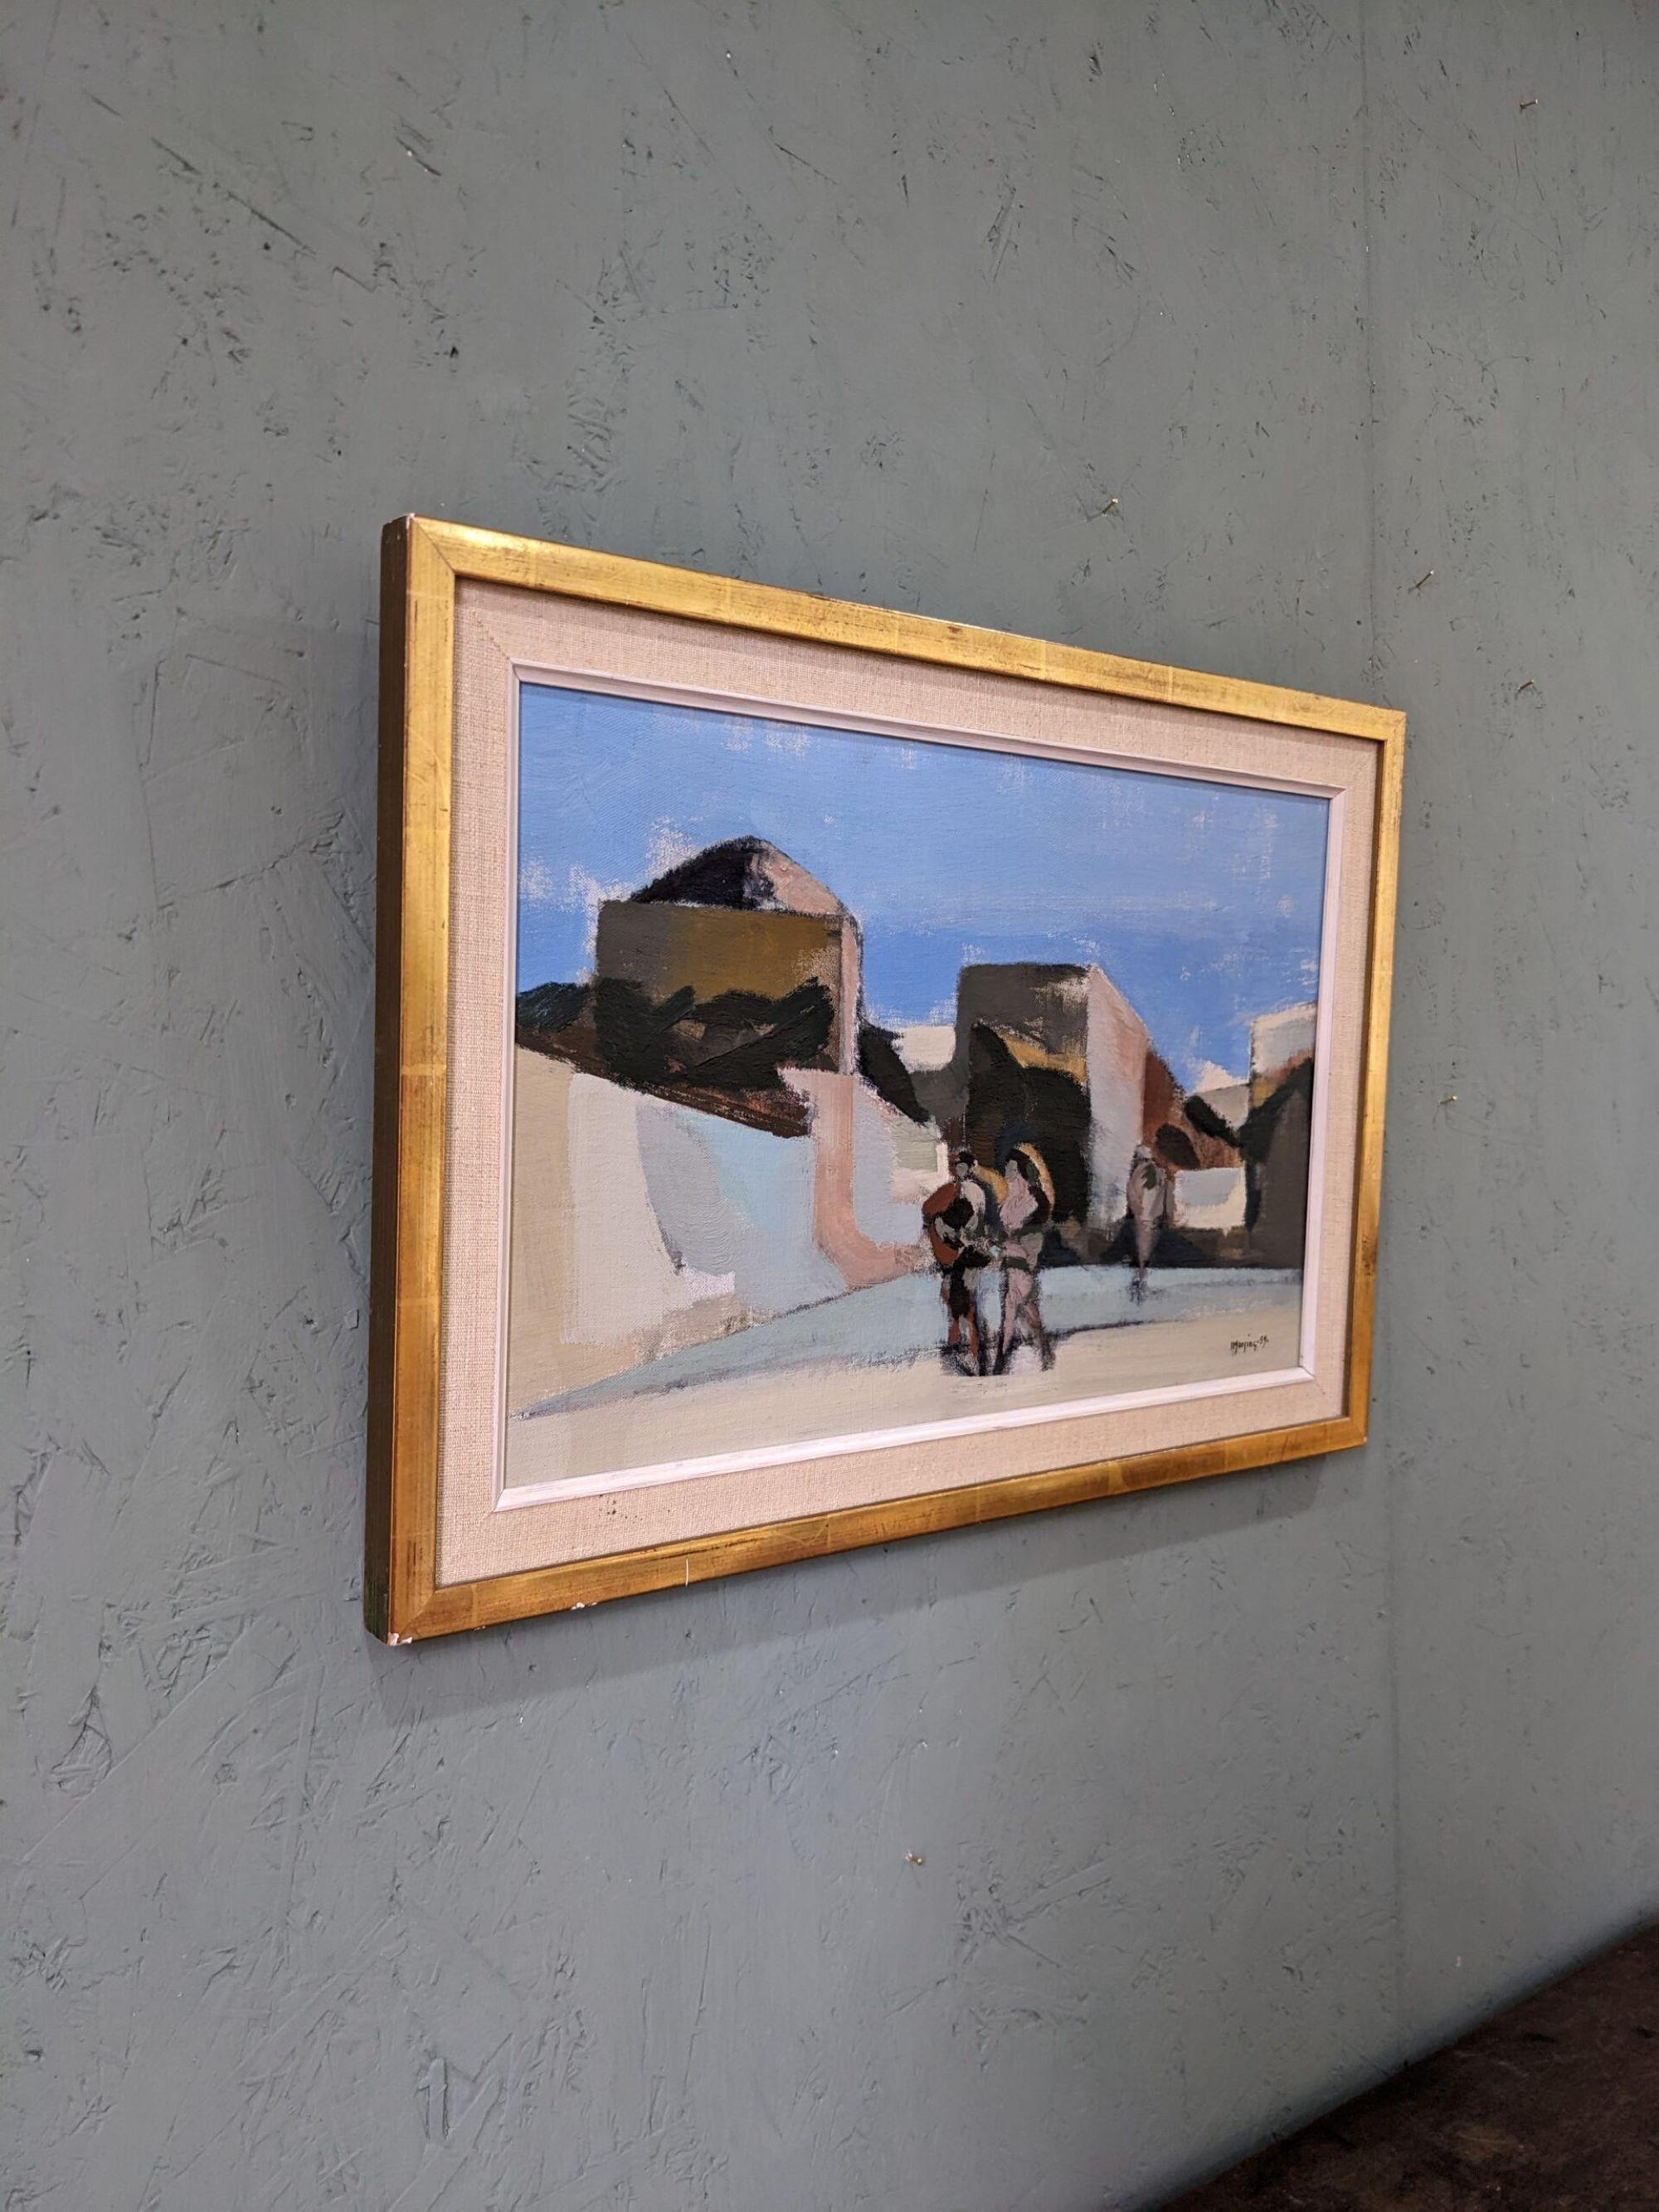 SPANISH MORNING
Size: 37.5 x 53.5cm (including frame)
Oil on board

A brilliantly executed semi-abstract oil composition, painted in 1959 by the established Swedish artist Ivar Morsing (1919-2009), whose works have been exhibited in public